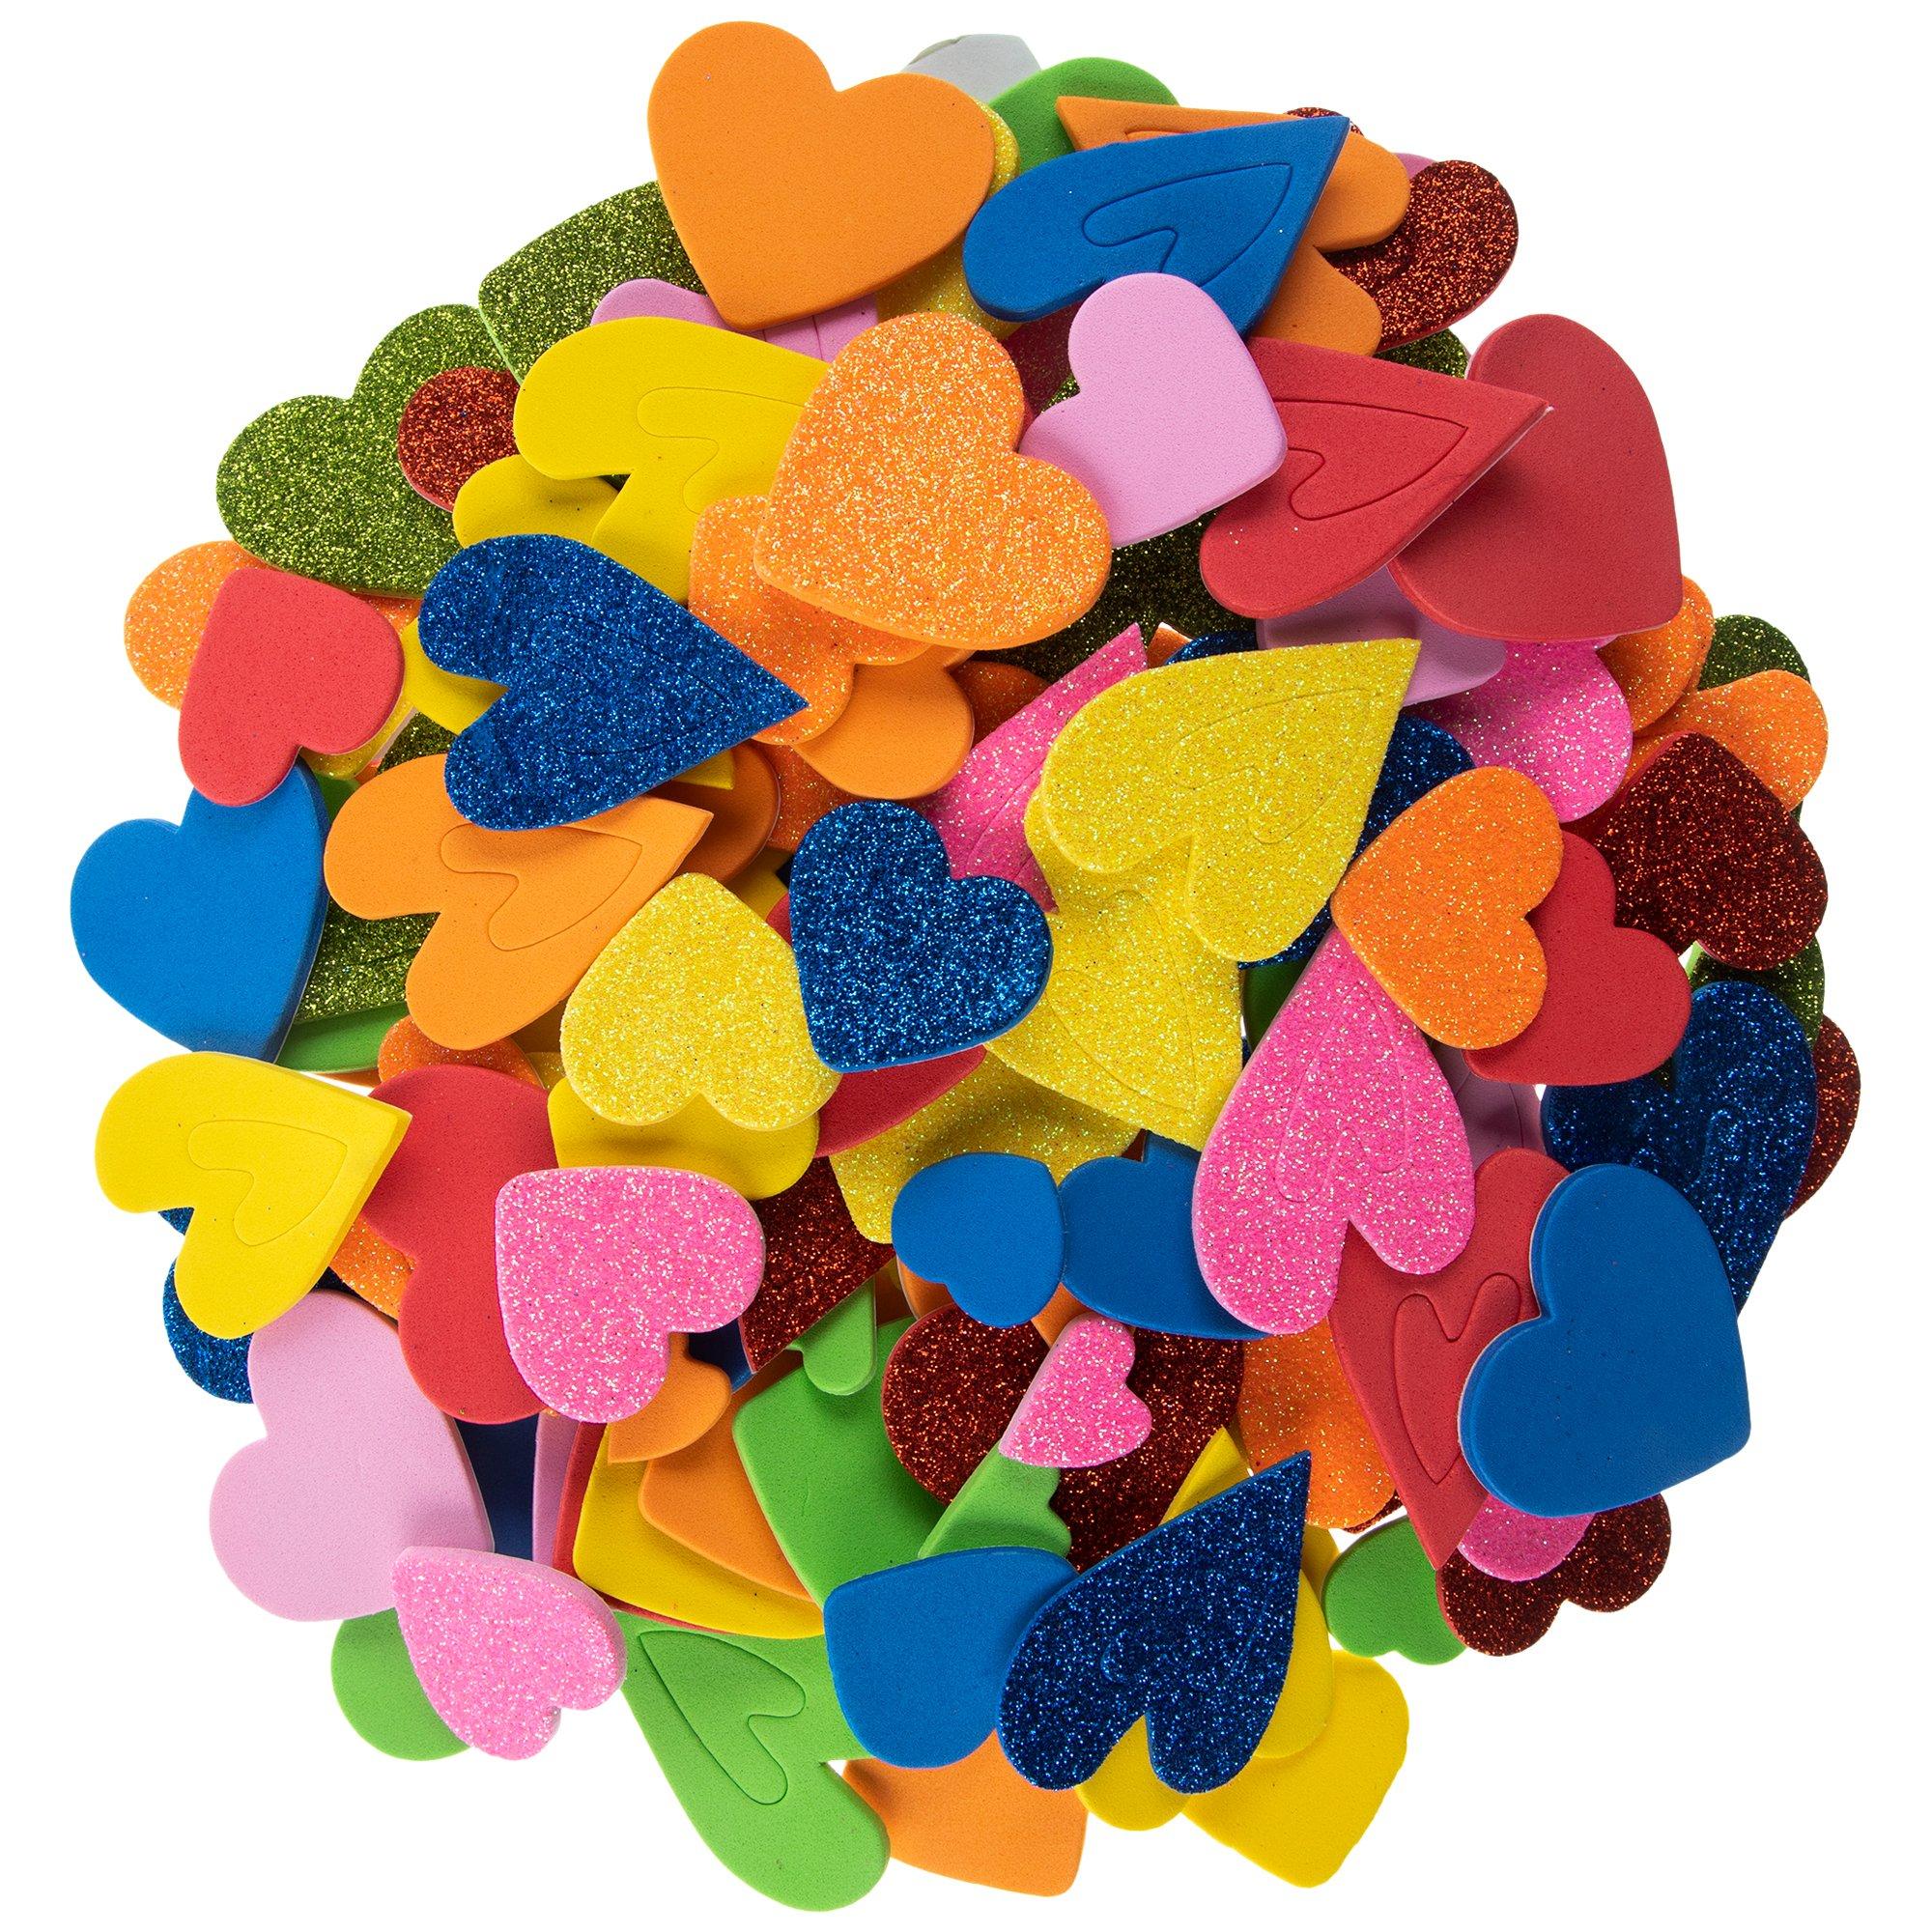  Cooraby 600 Pieces Heart Foam Stickers Self-Adhesive